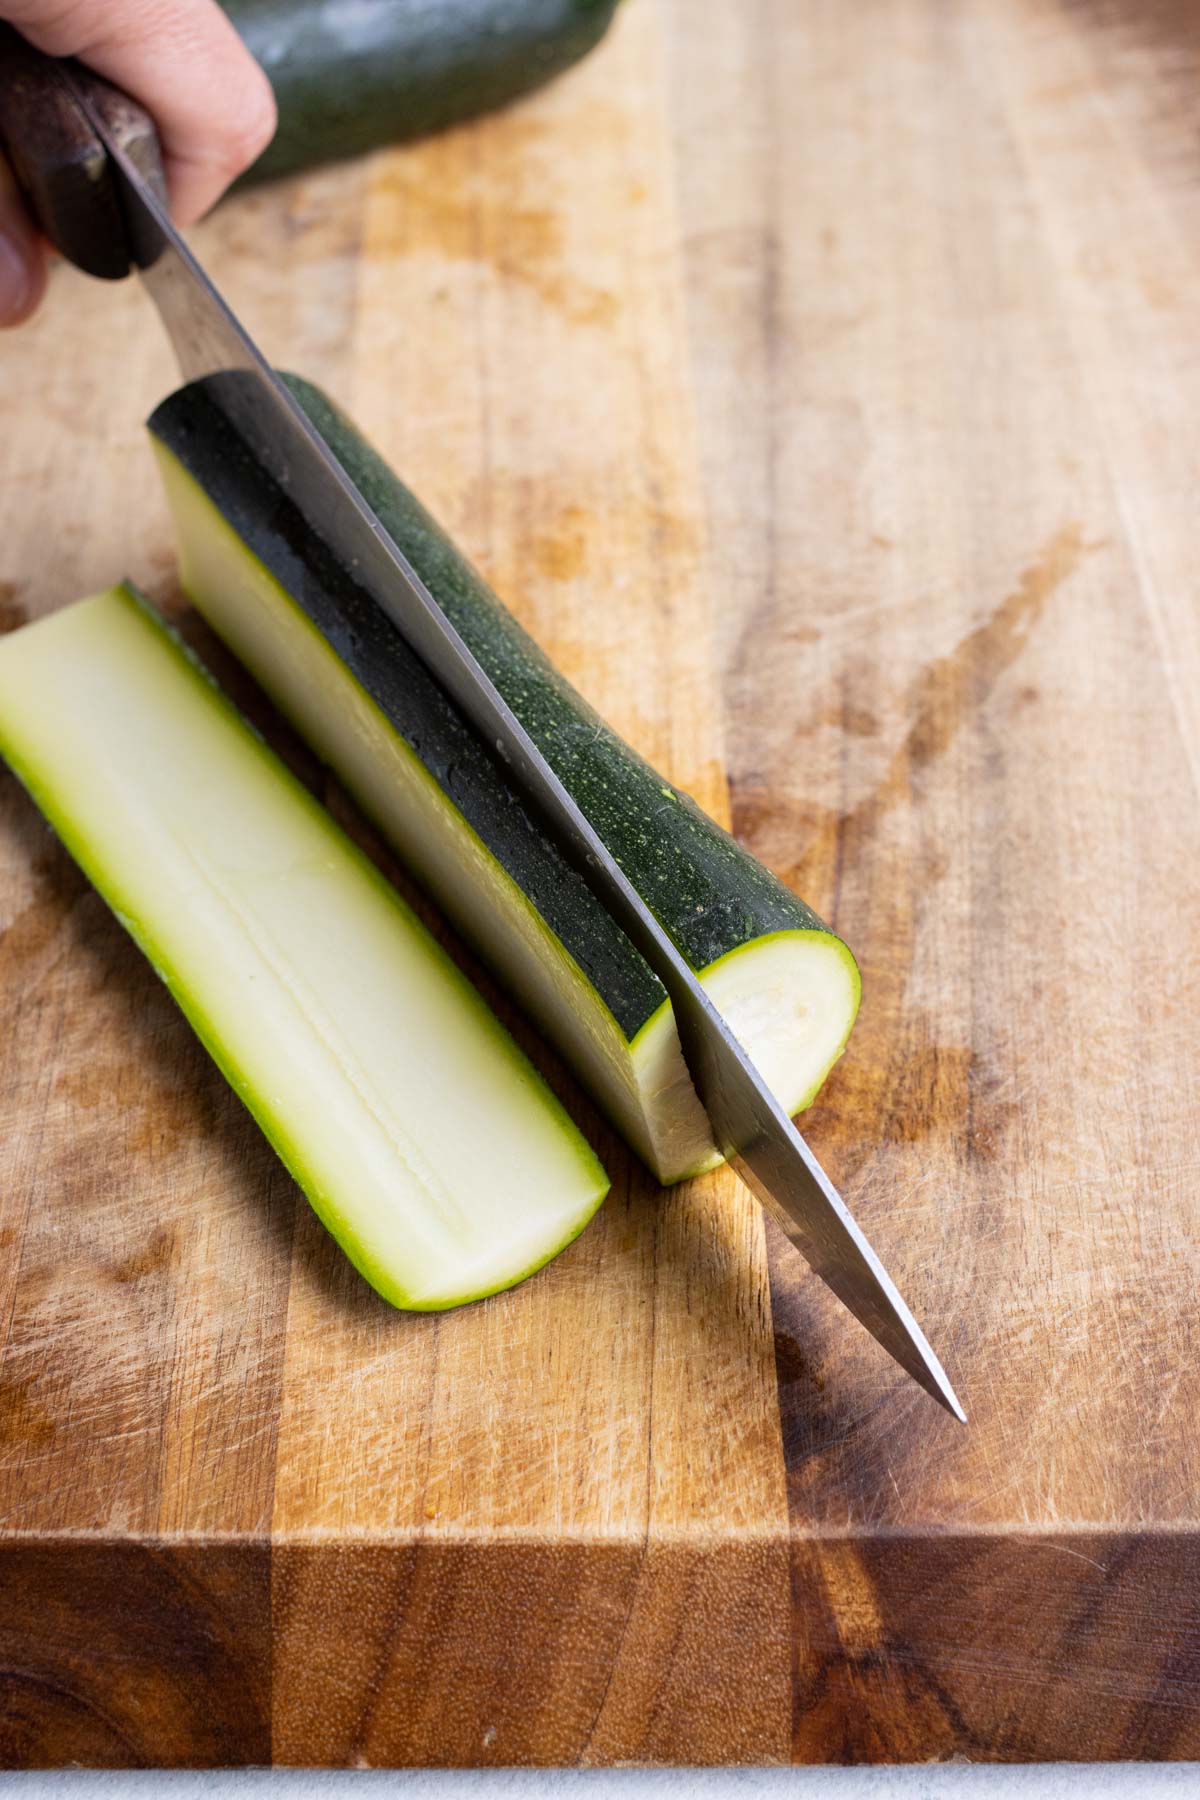 A knife cuts a zucchini into strips for lasagna